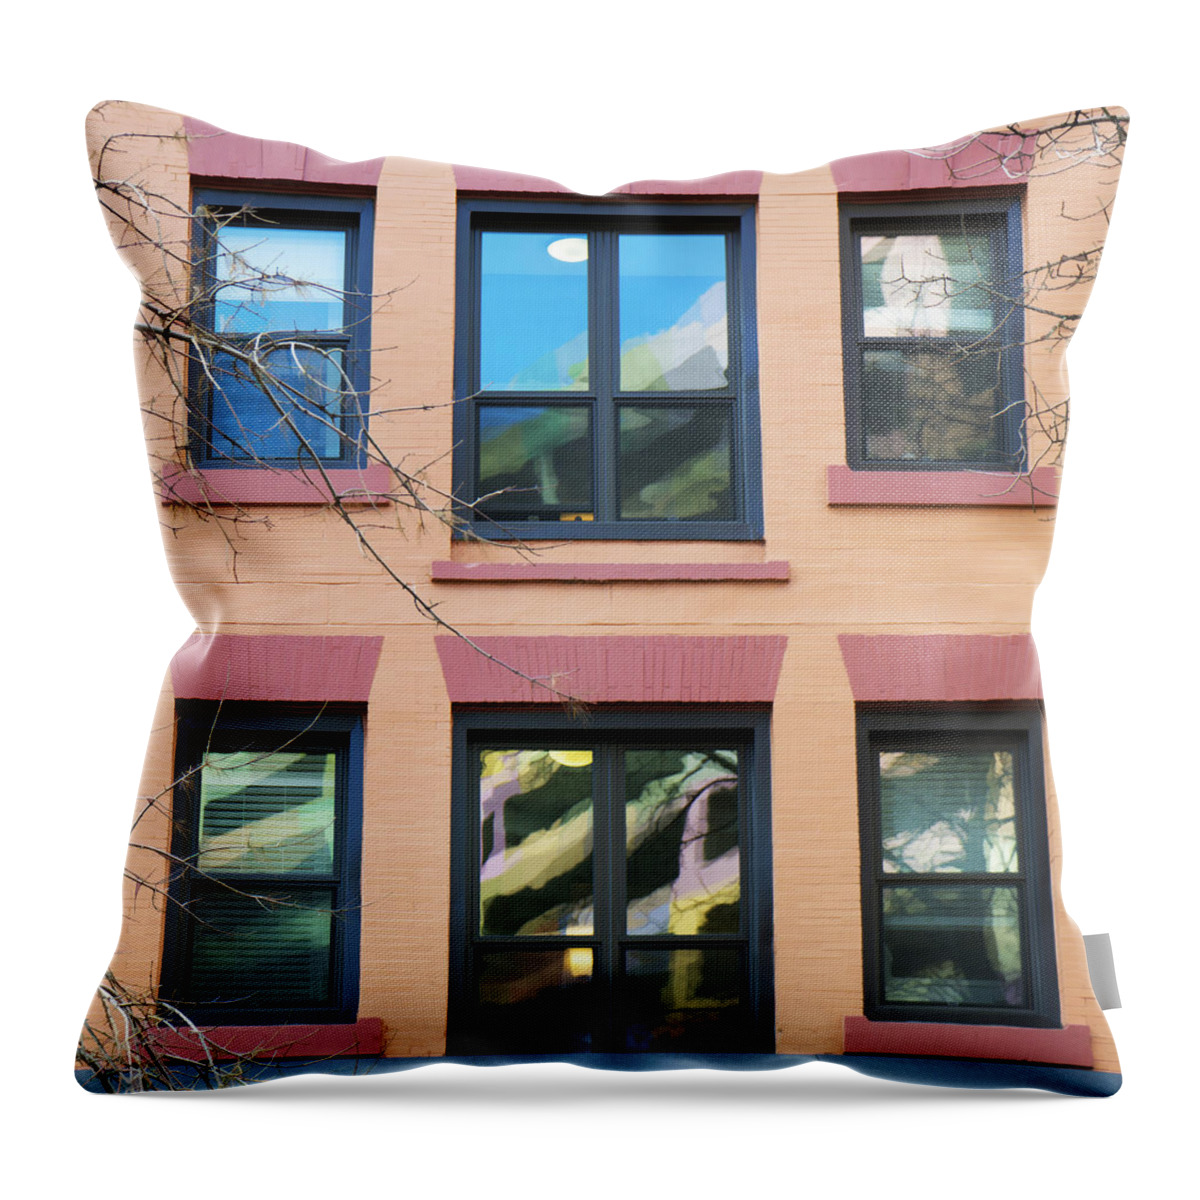 Mpls. Throw Pillow featuring the photograph Window Reflections by Susan Stone